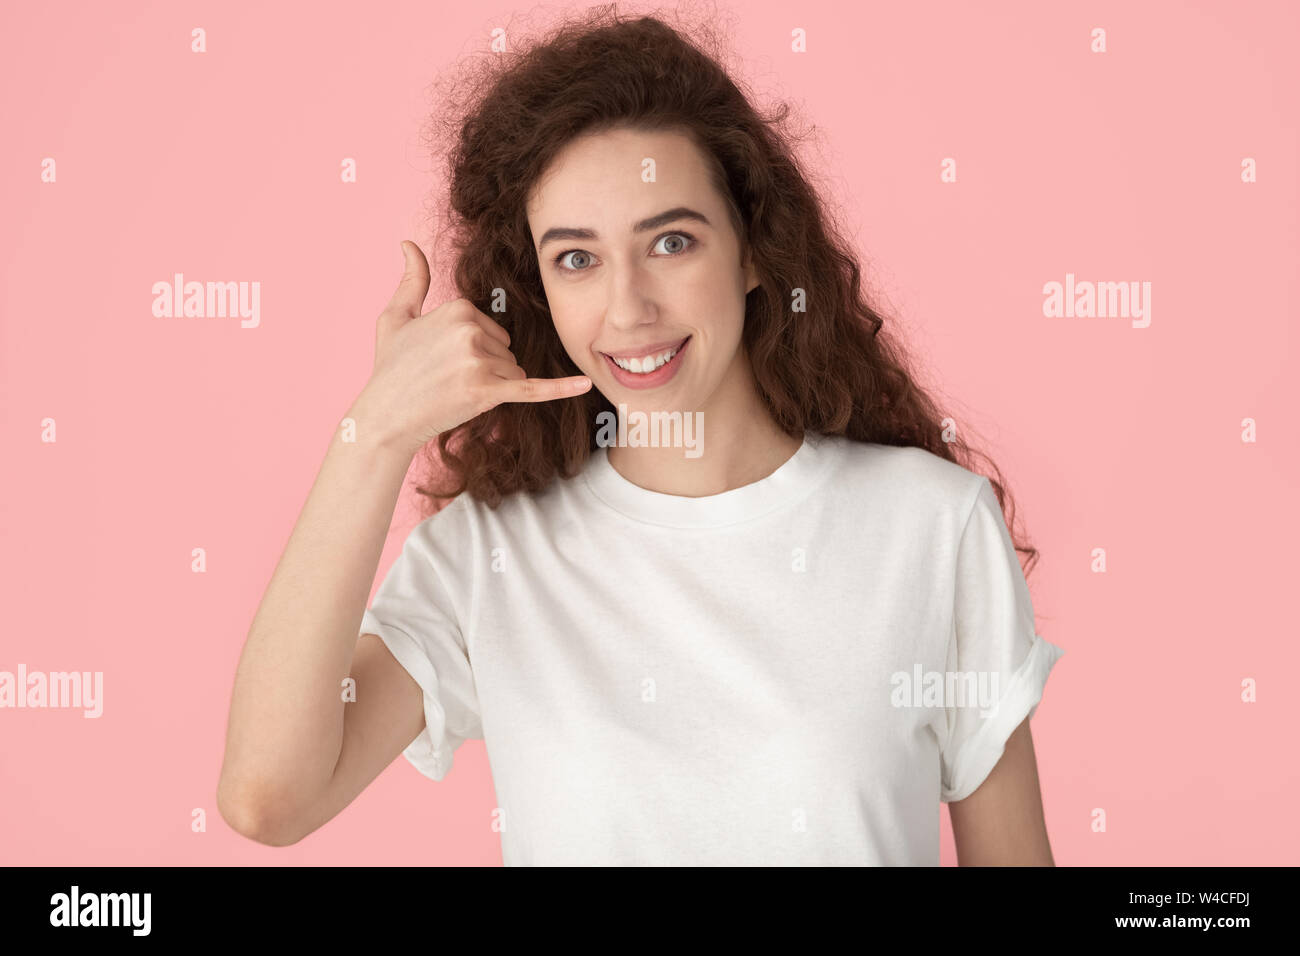 Smiling woman showing call me gesture with fingers studio shot Stock Photo